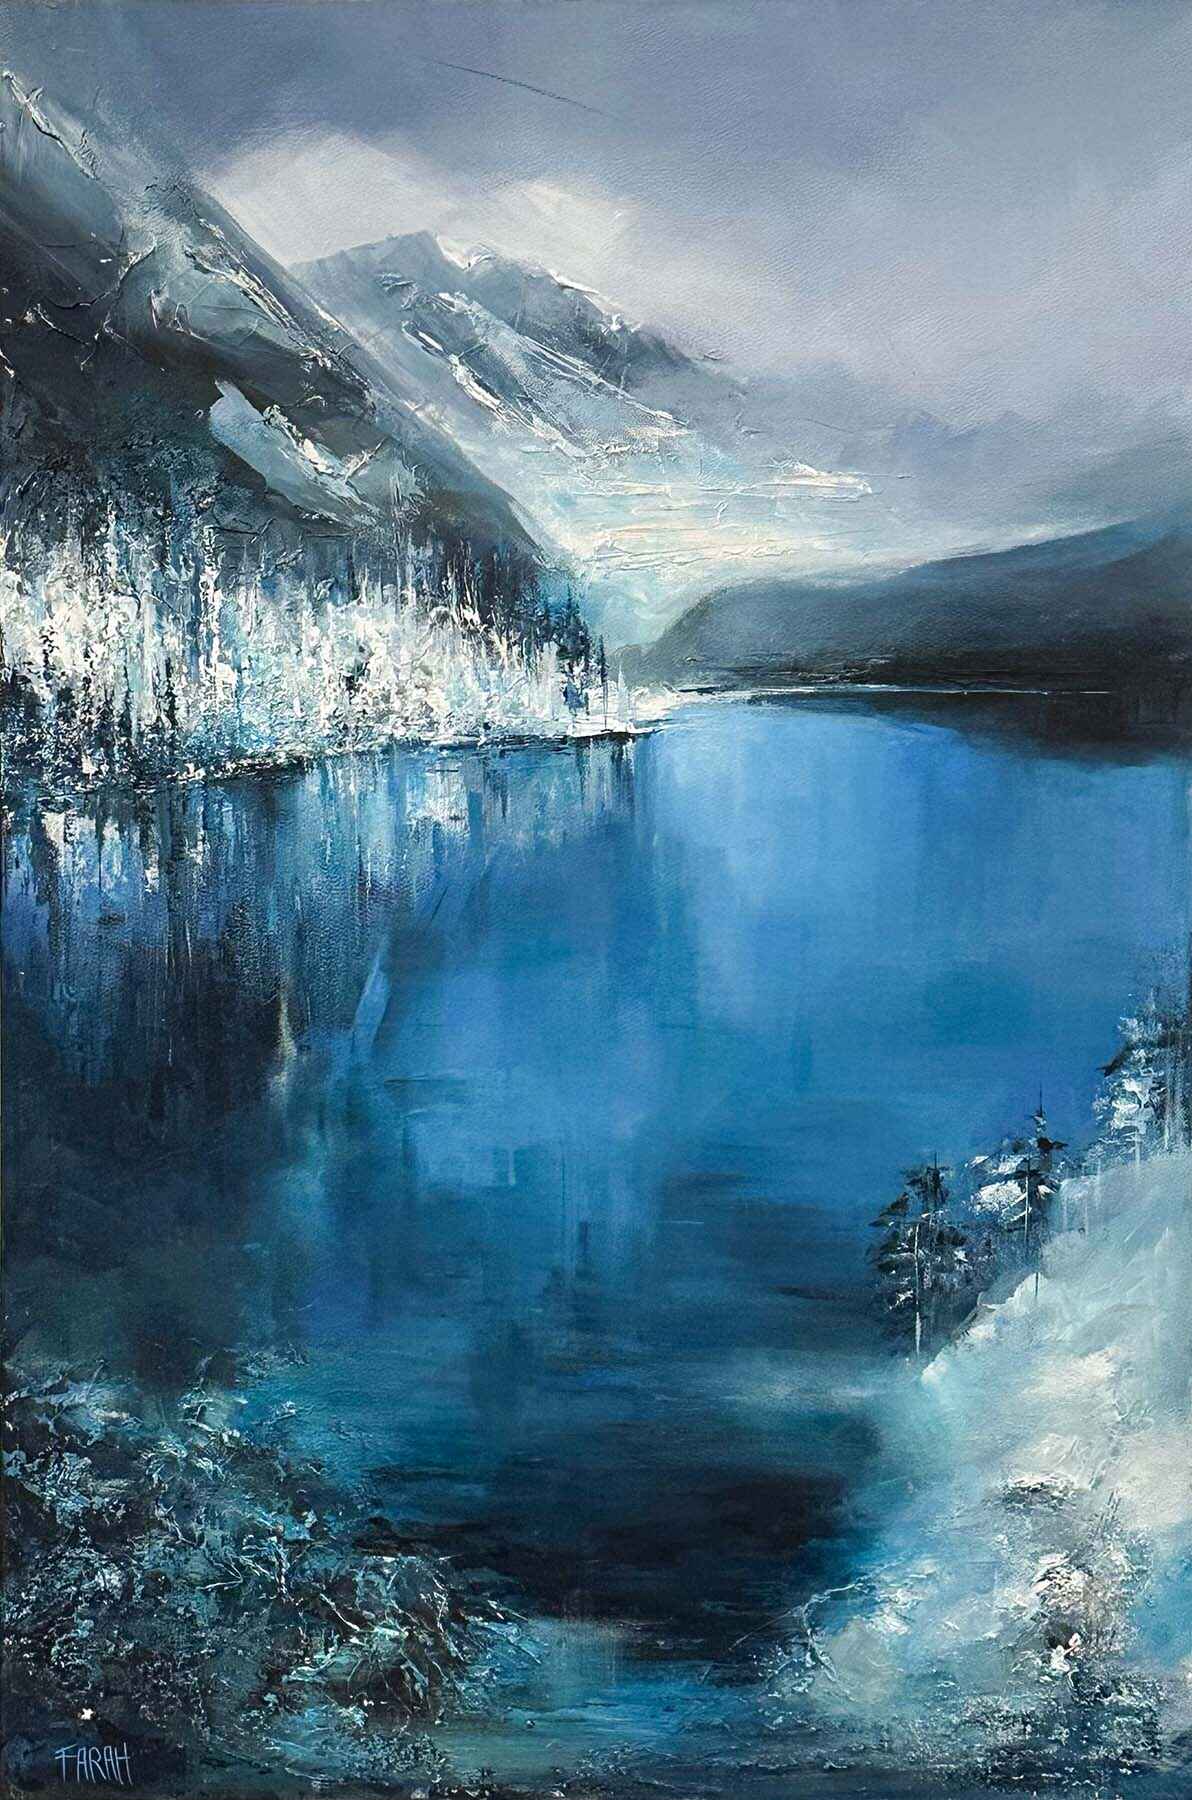 Contemporary art. Title: Lake Louise, Acrylic on Canvas, 36 x 24 in by Contemporary Canadian artist Farahnaz Samari.